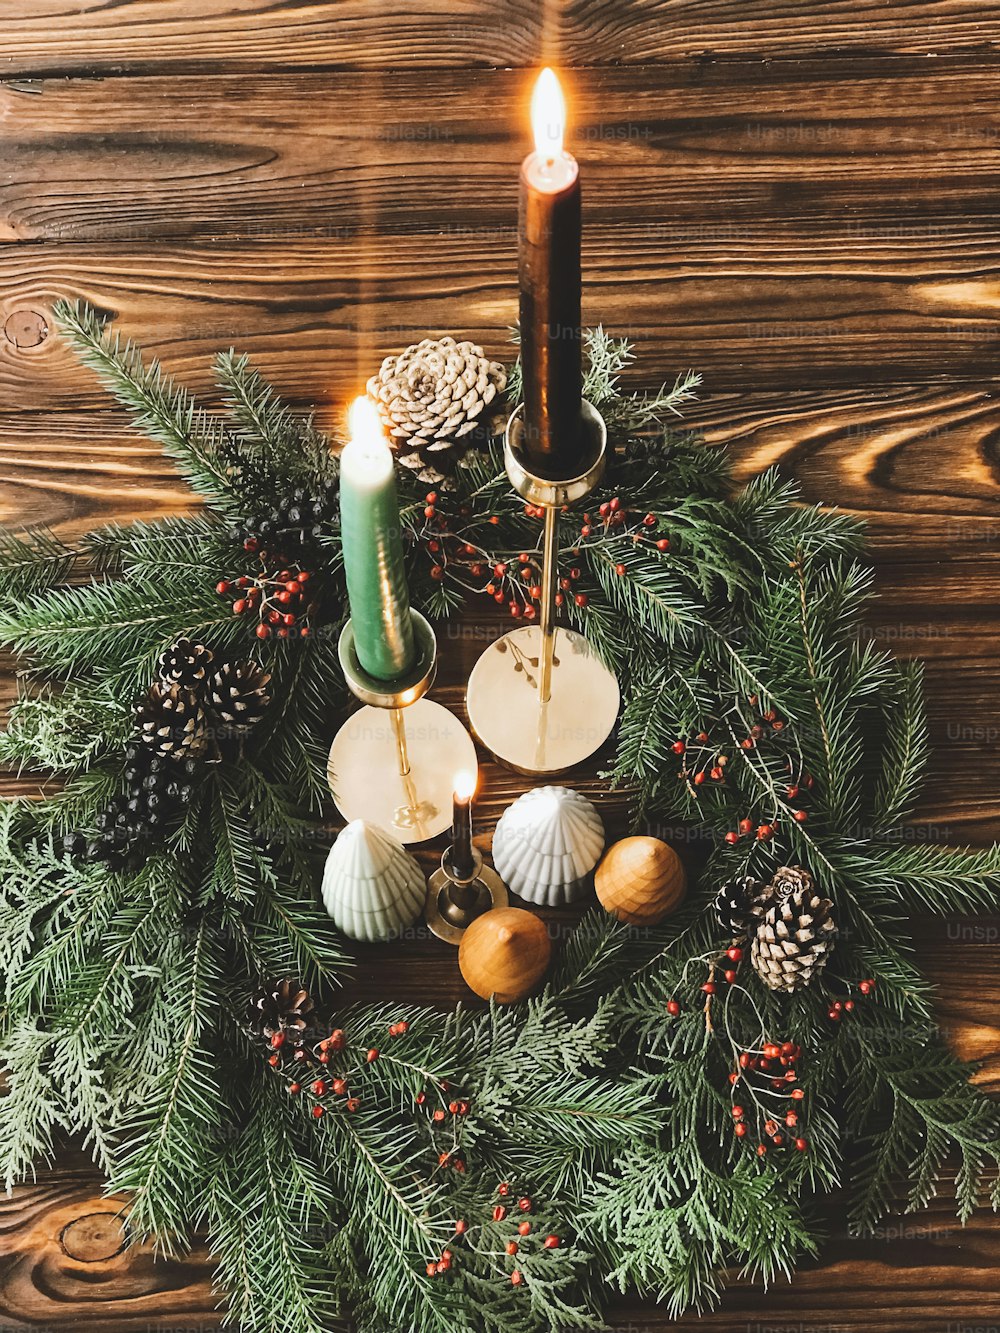 Christmas wreath with candles, pine cones, trees and fir branches on rustic wood, christmas table setting and decor. Festive simple natural home decorations. Happy holidays and Merry Christmas!